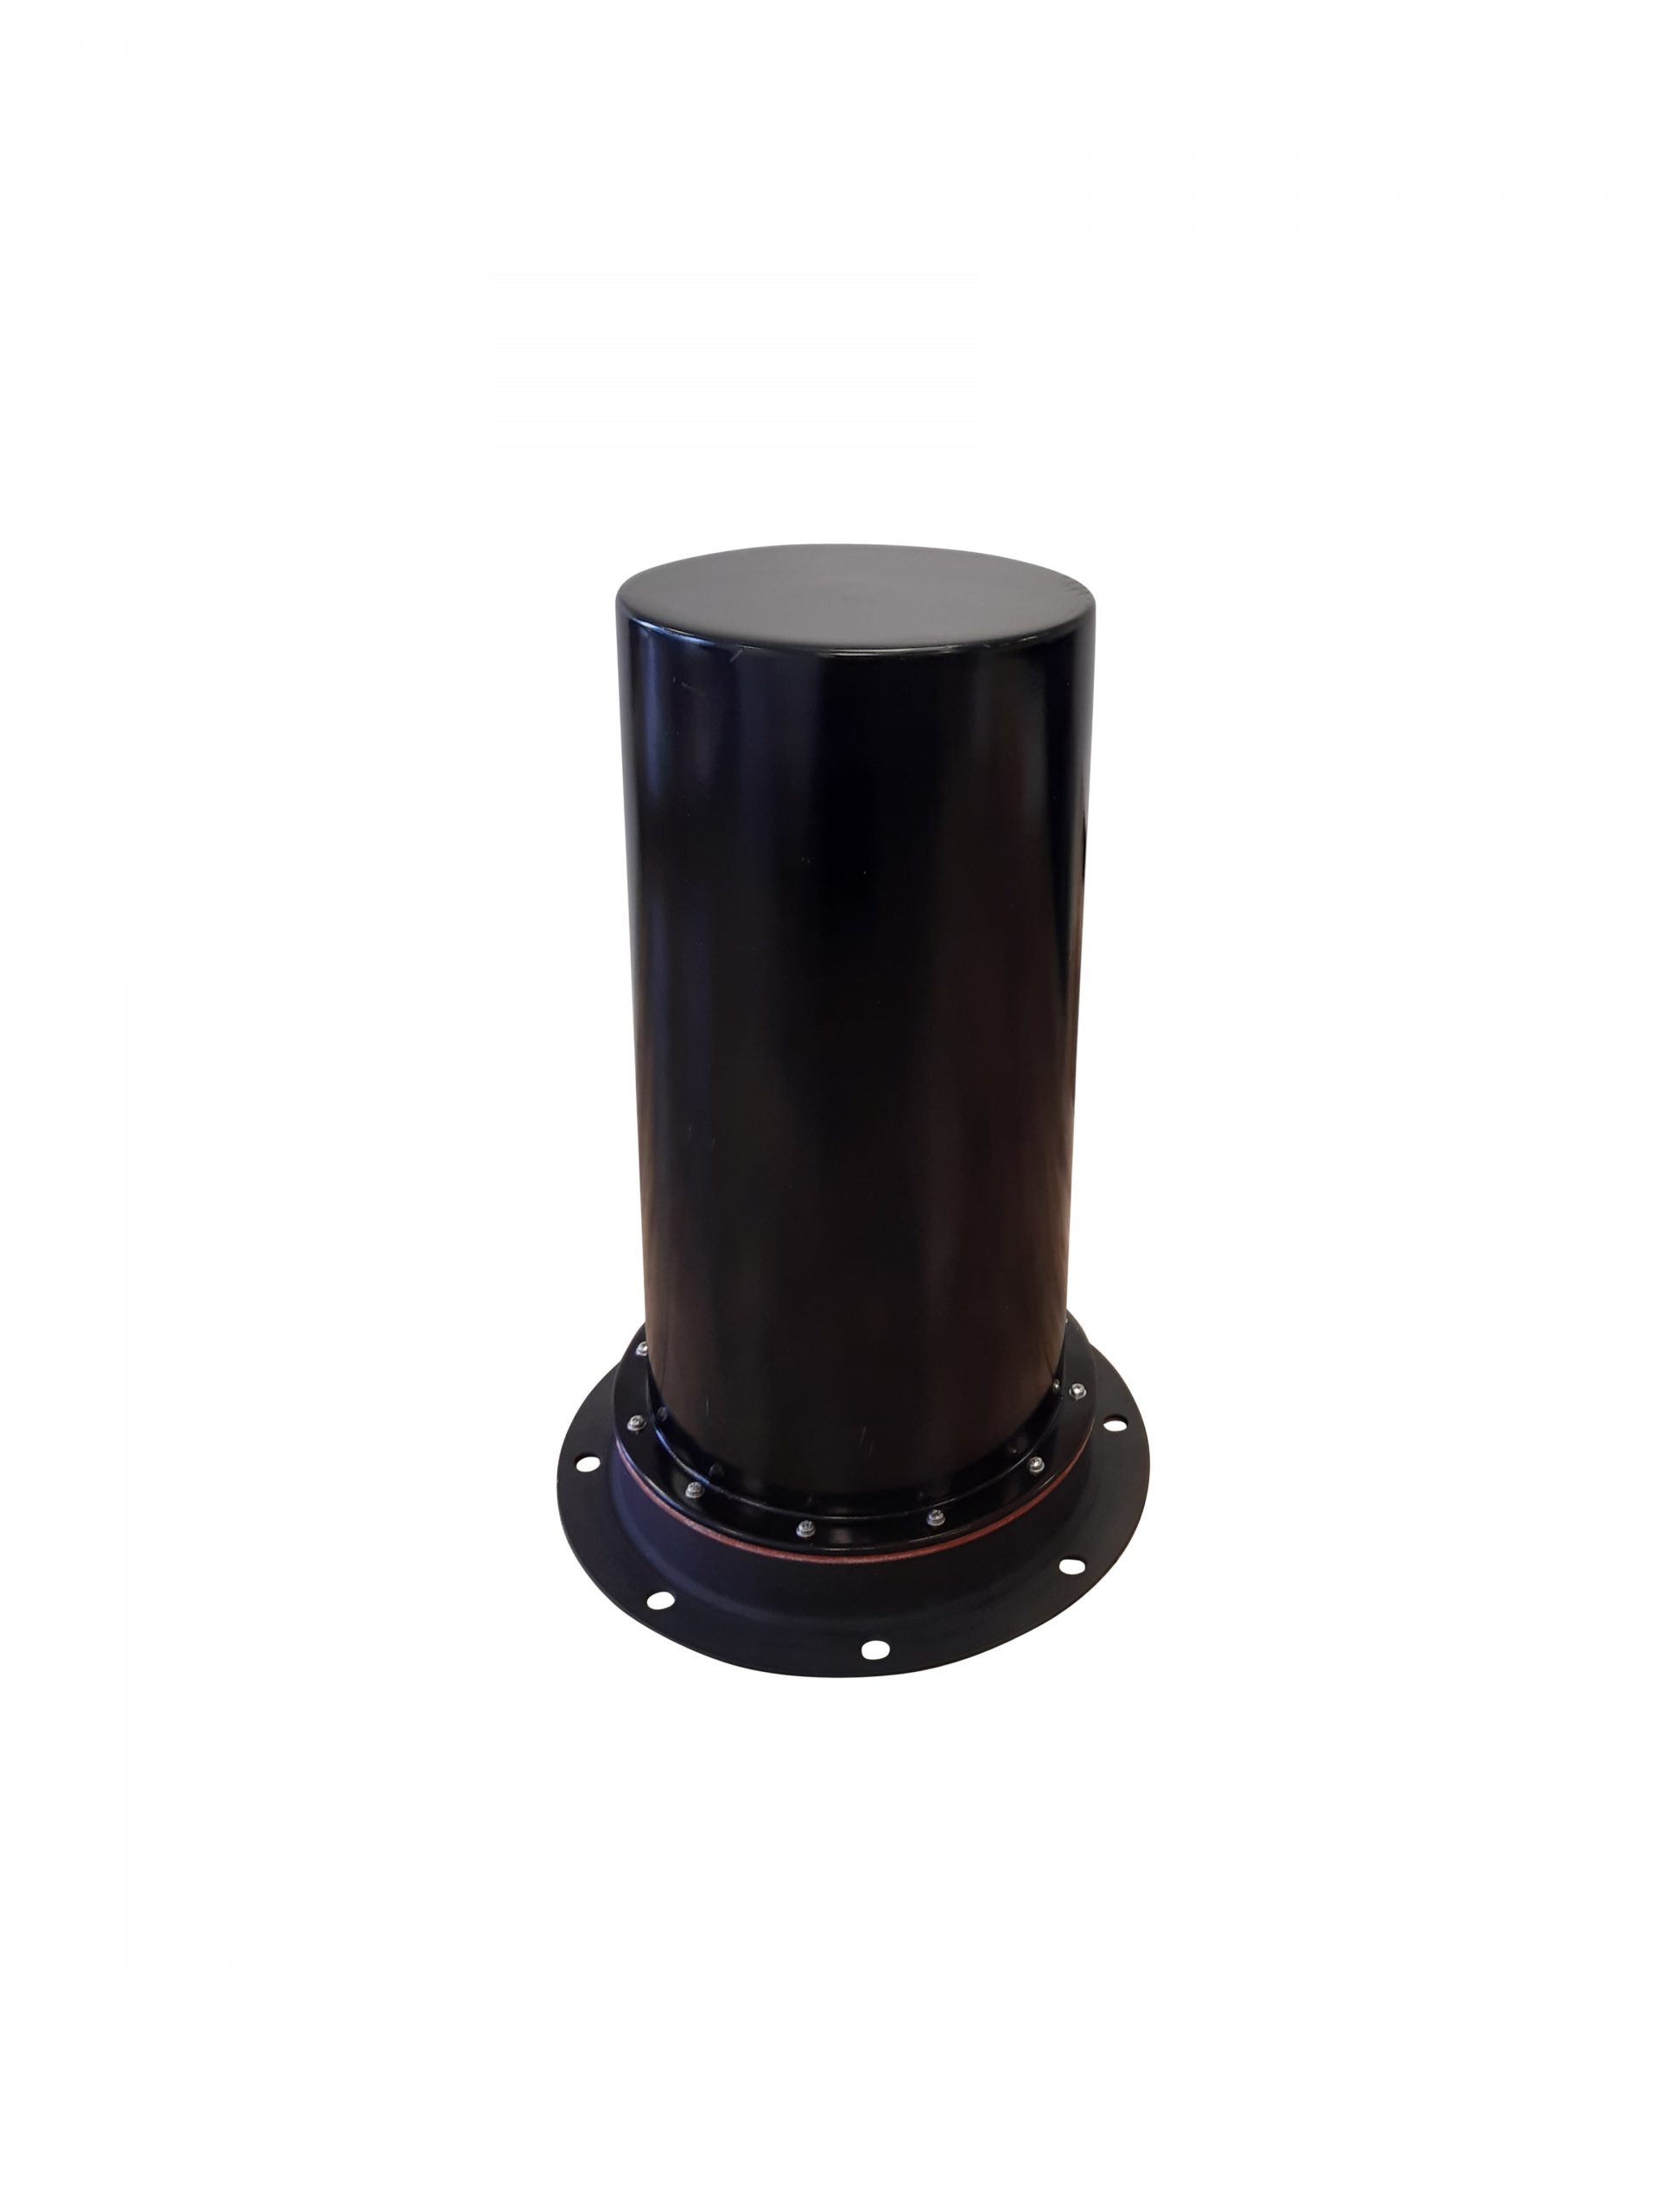 High Power Omnidirectional Wideband Jammer Antenna (Vehicle and Fixed-Site)